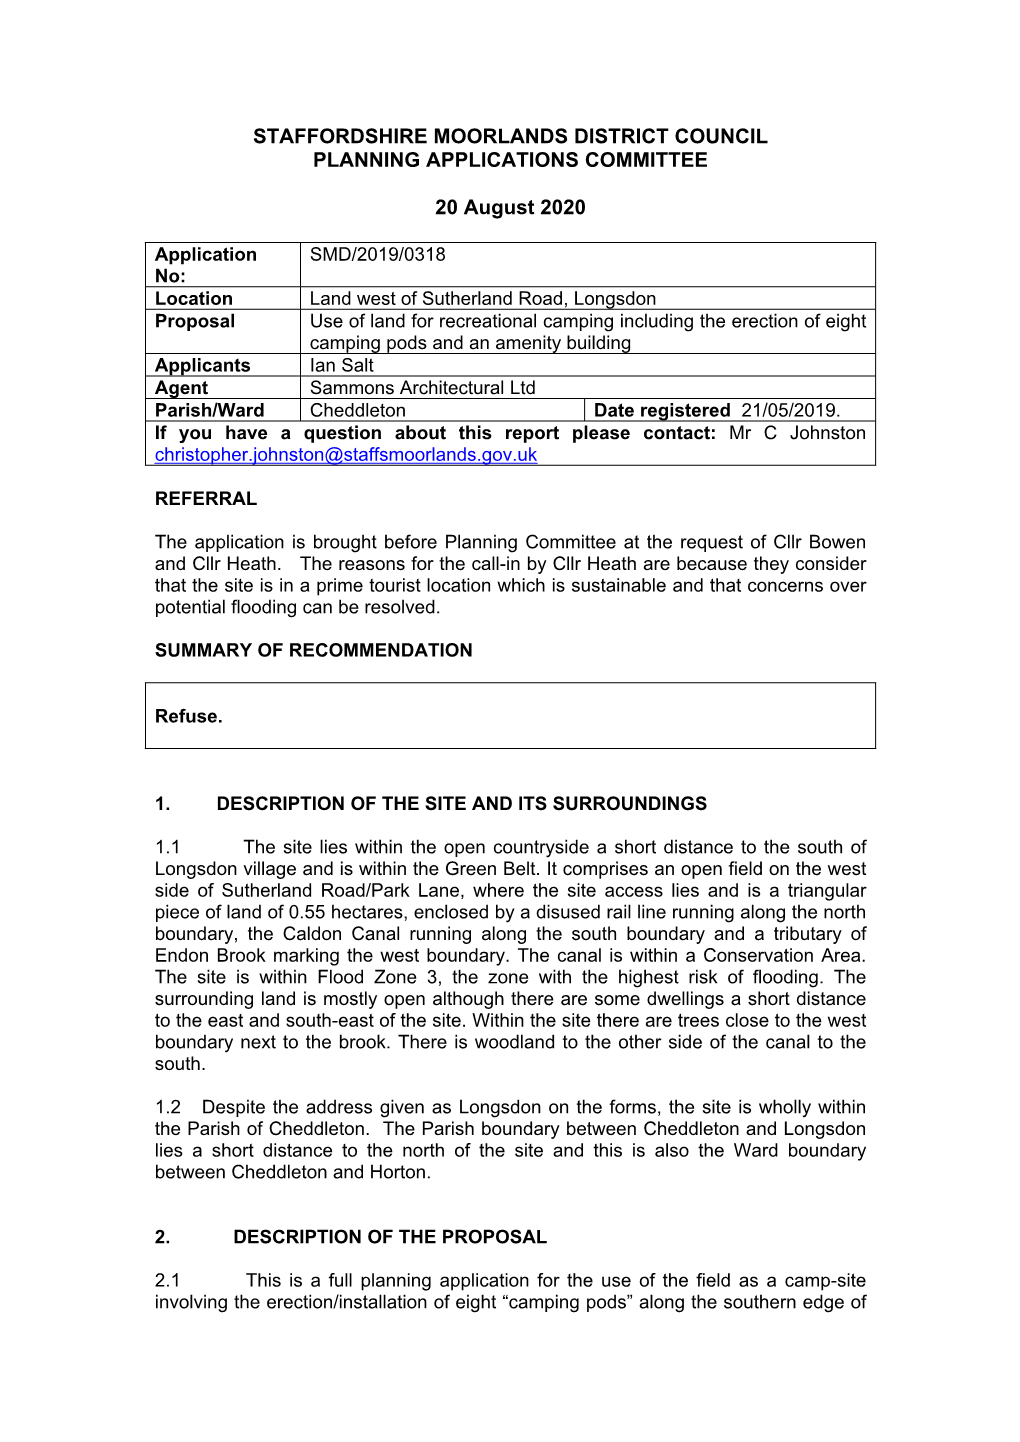 Staffordshire Moorlands District Council Planning Applications Committee